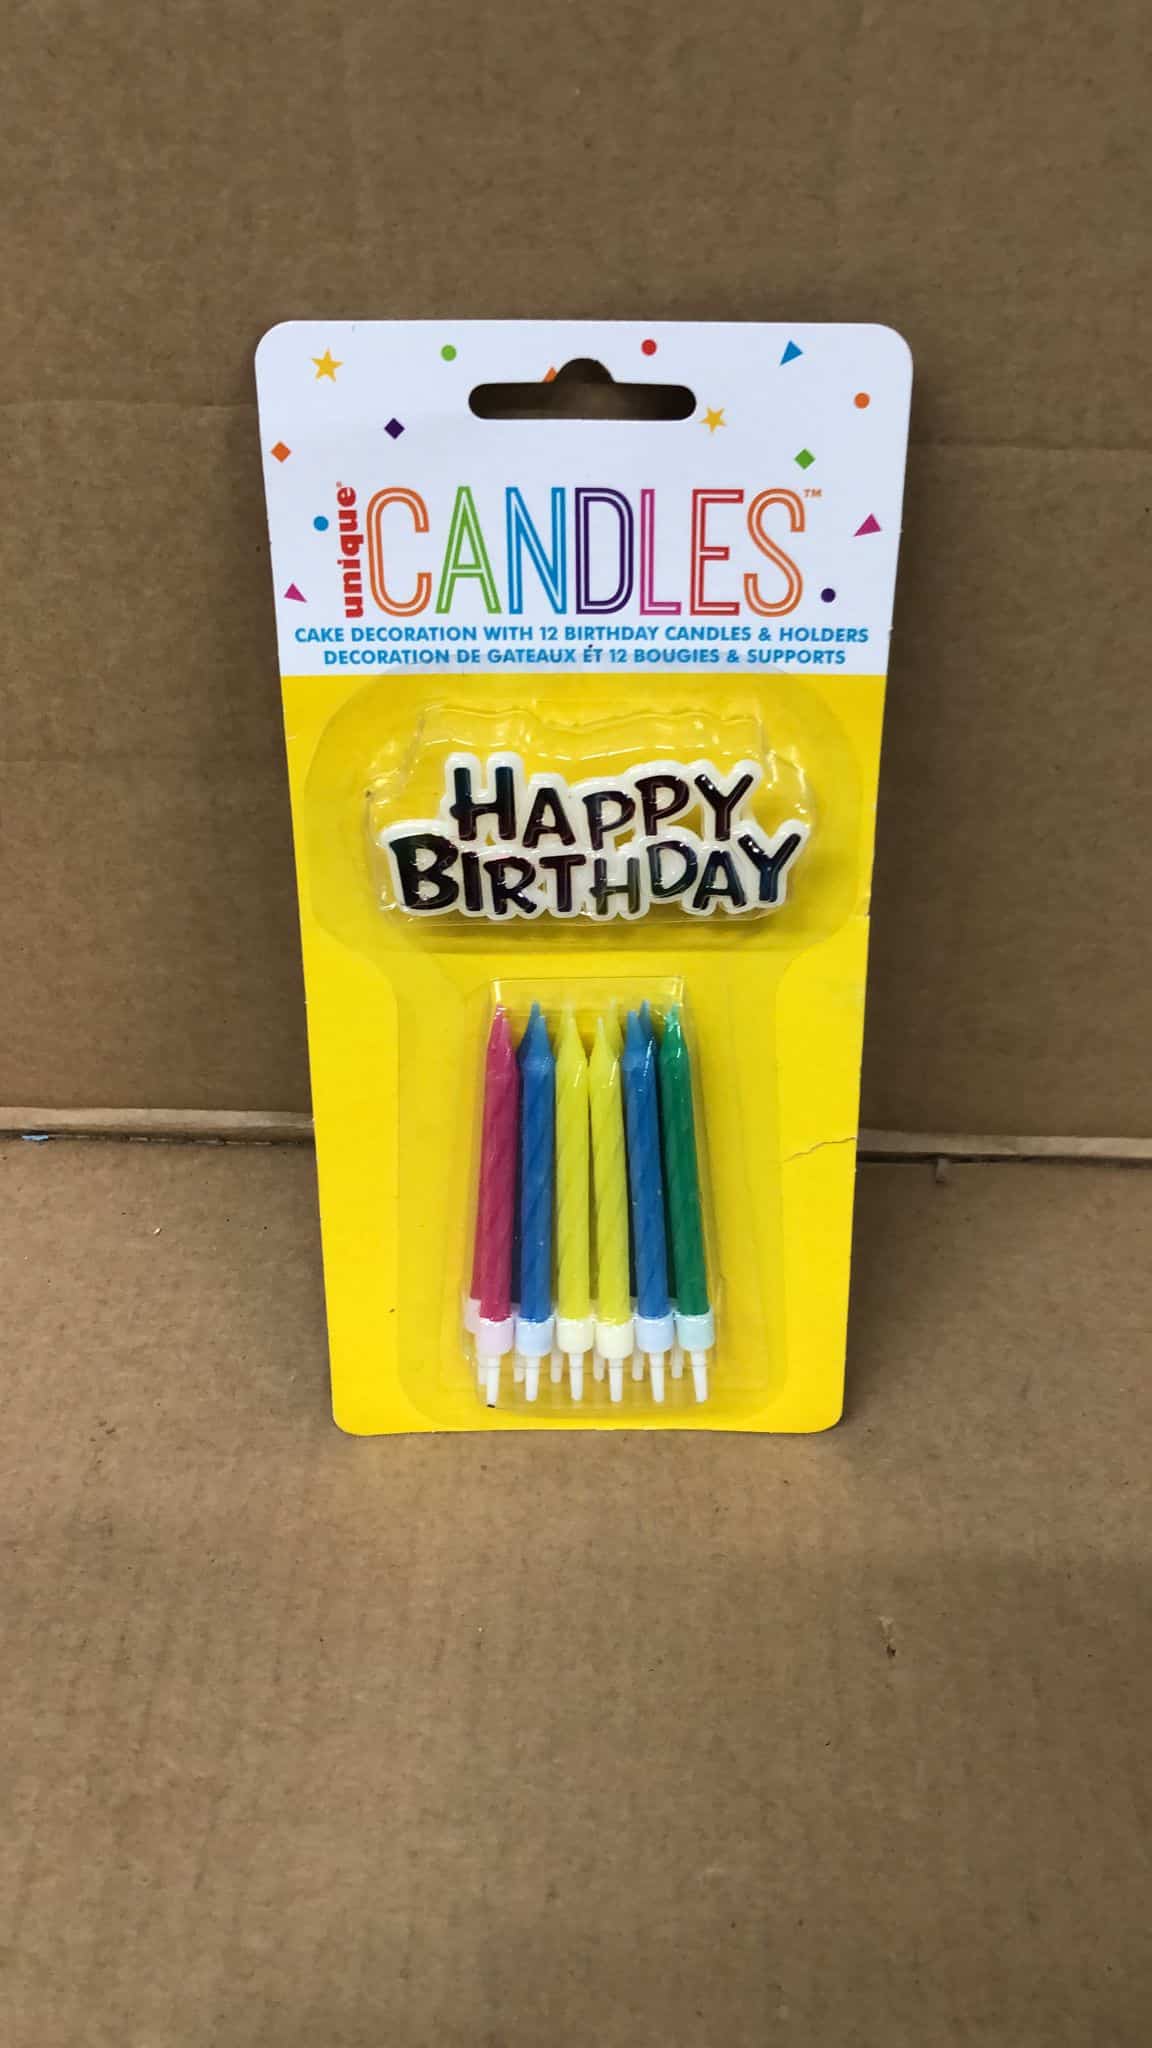 12 Candles And Happy Birthday Cake Topper-59601